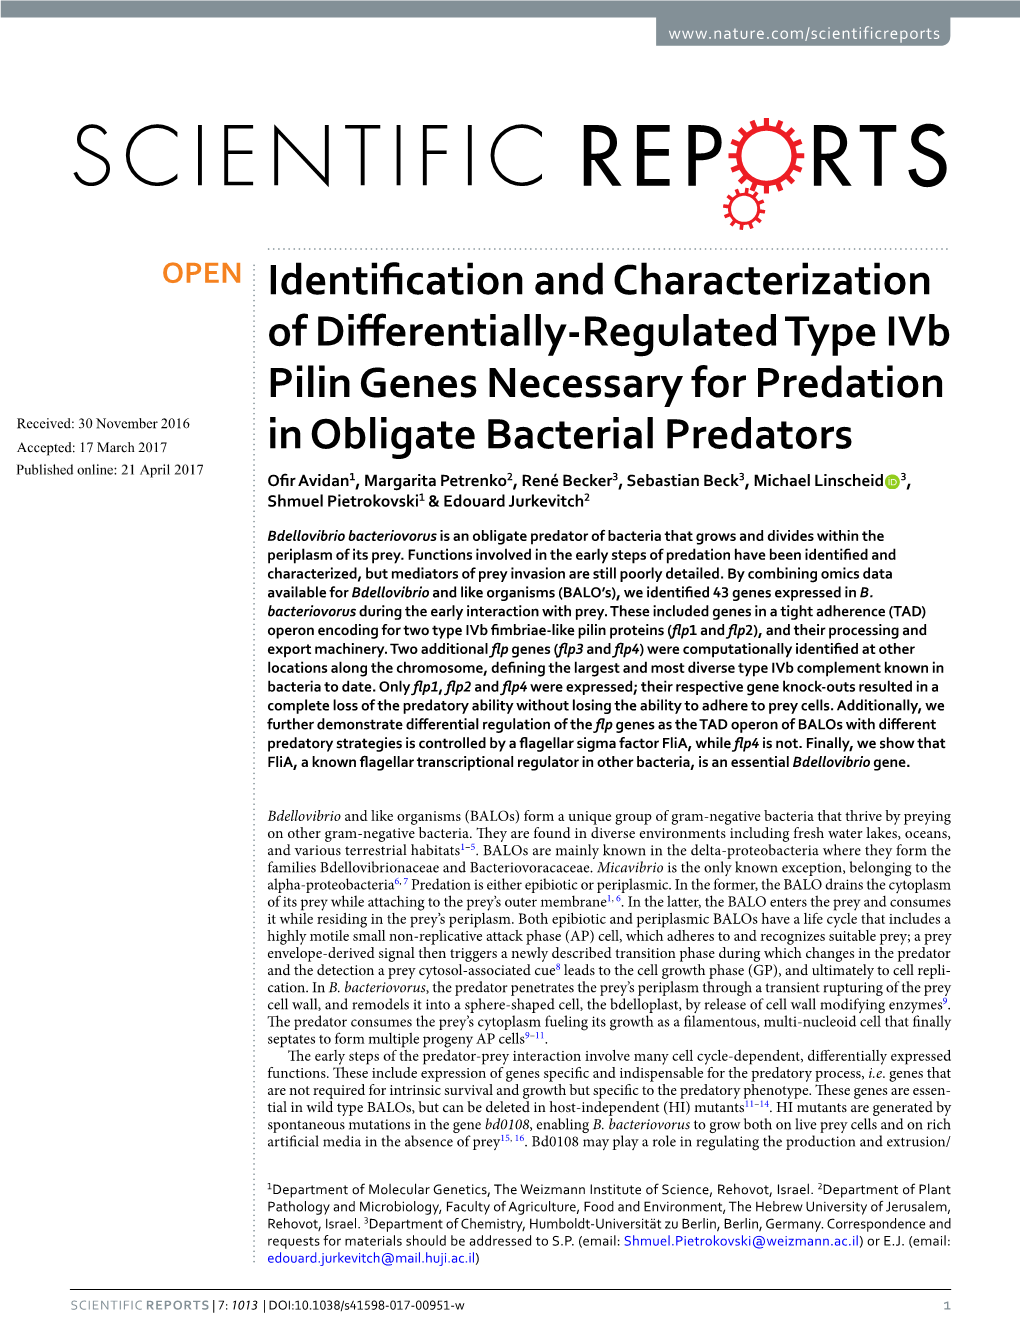 Identification and Characterization of Differentially-Regulated Type Ivb